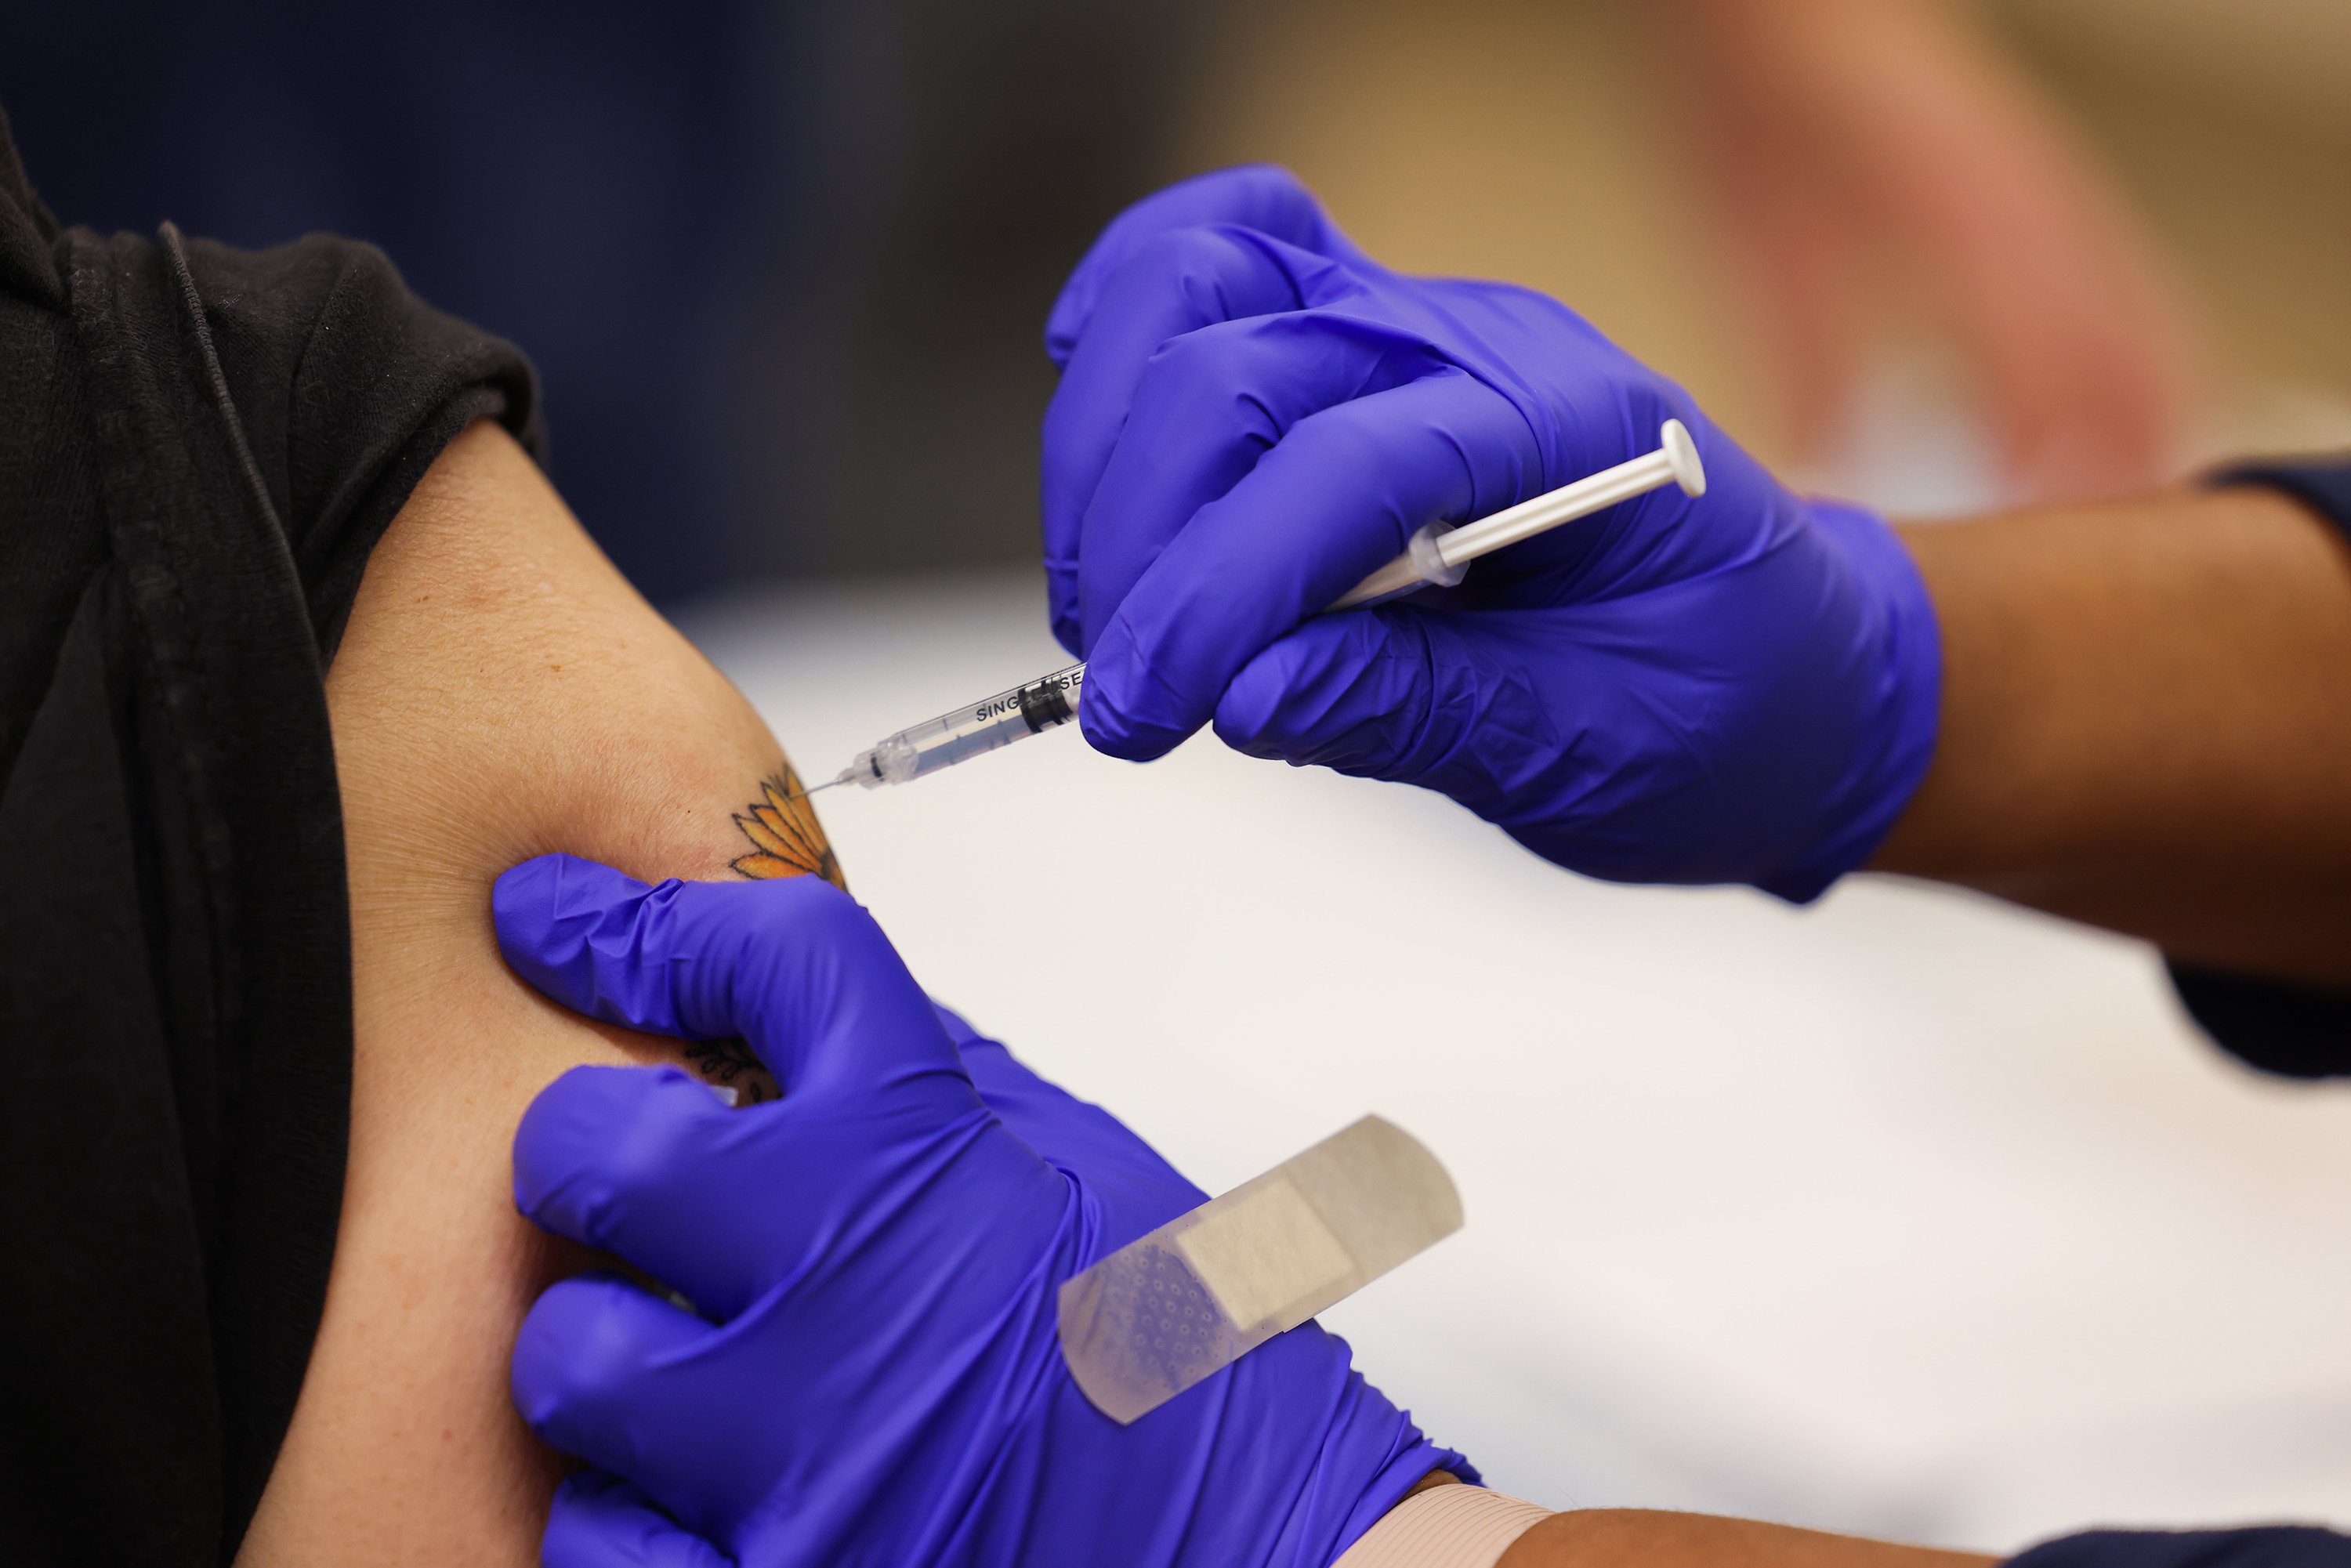 A booster shot of the Pfizer COVID-19 vaccine is being injected into the arm of a person in Freeport, New York on November 30, 2021.